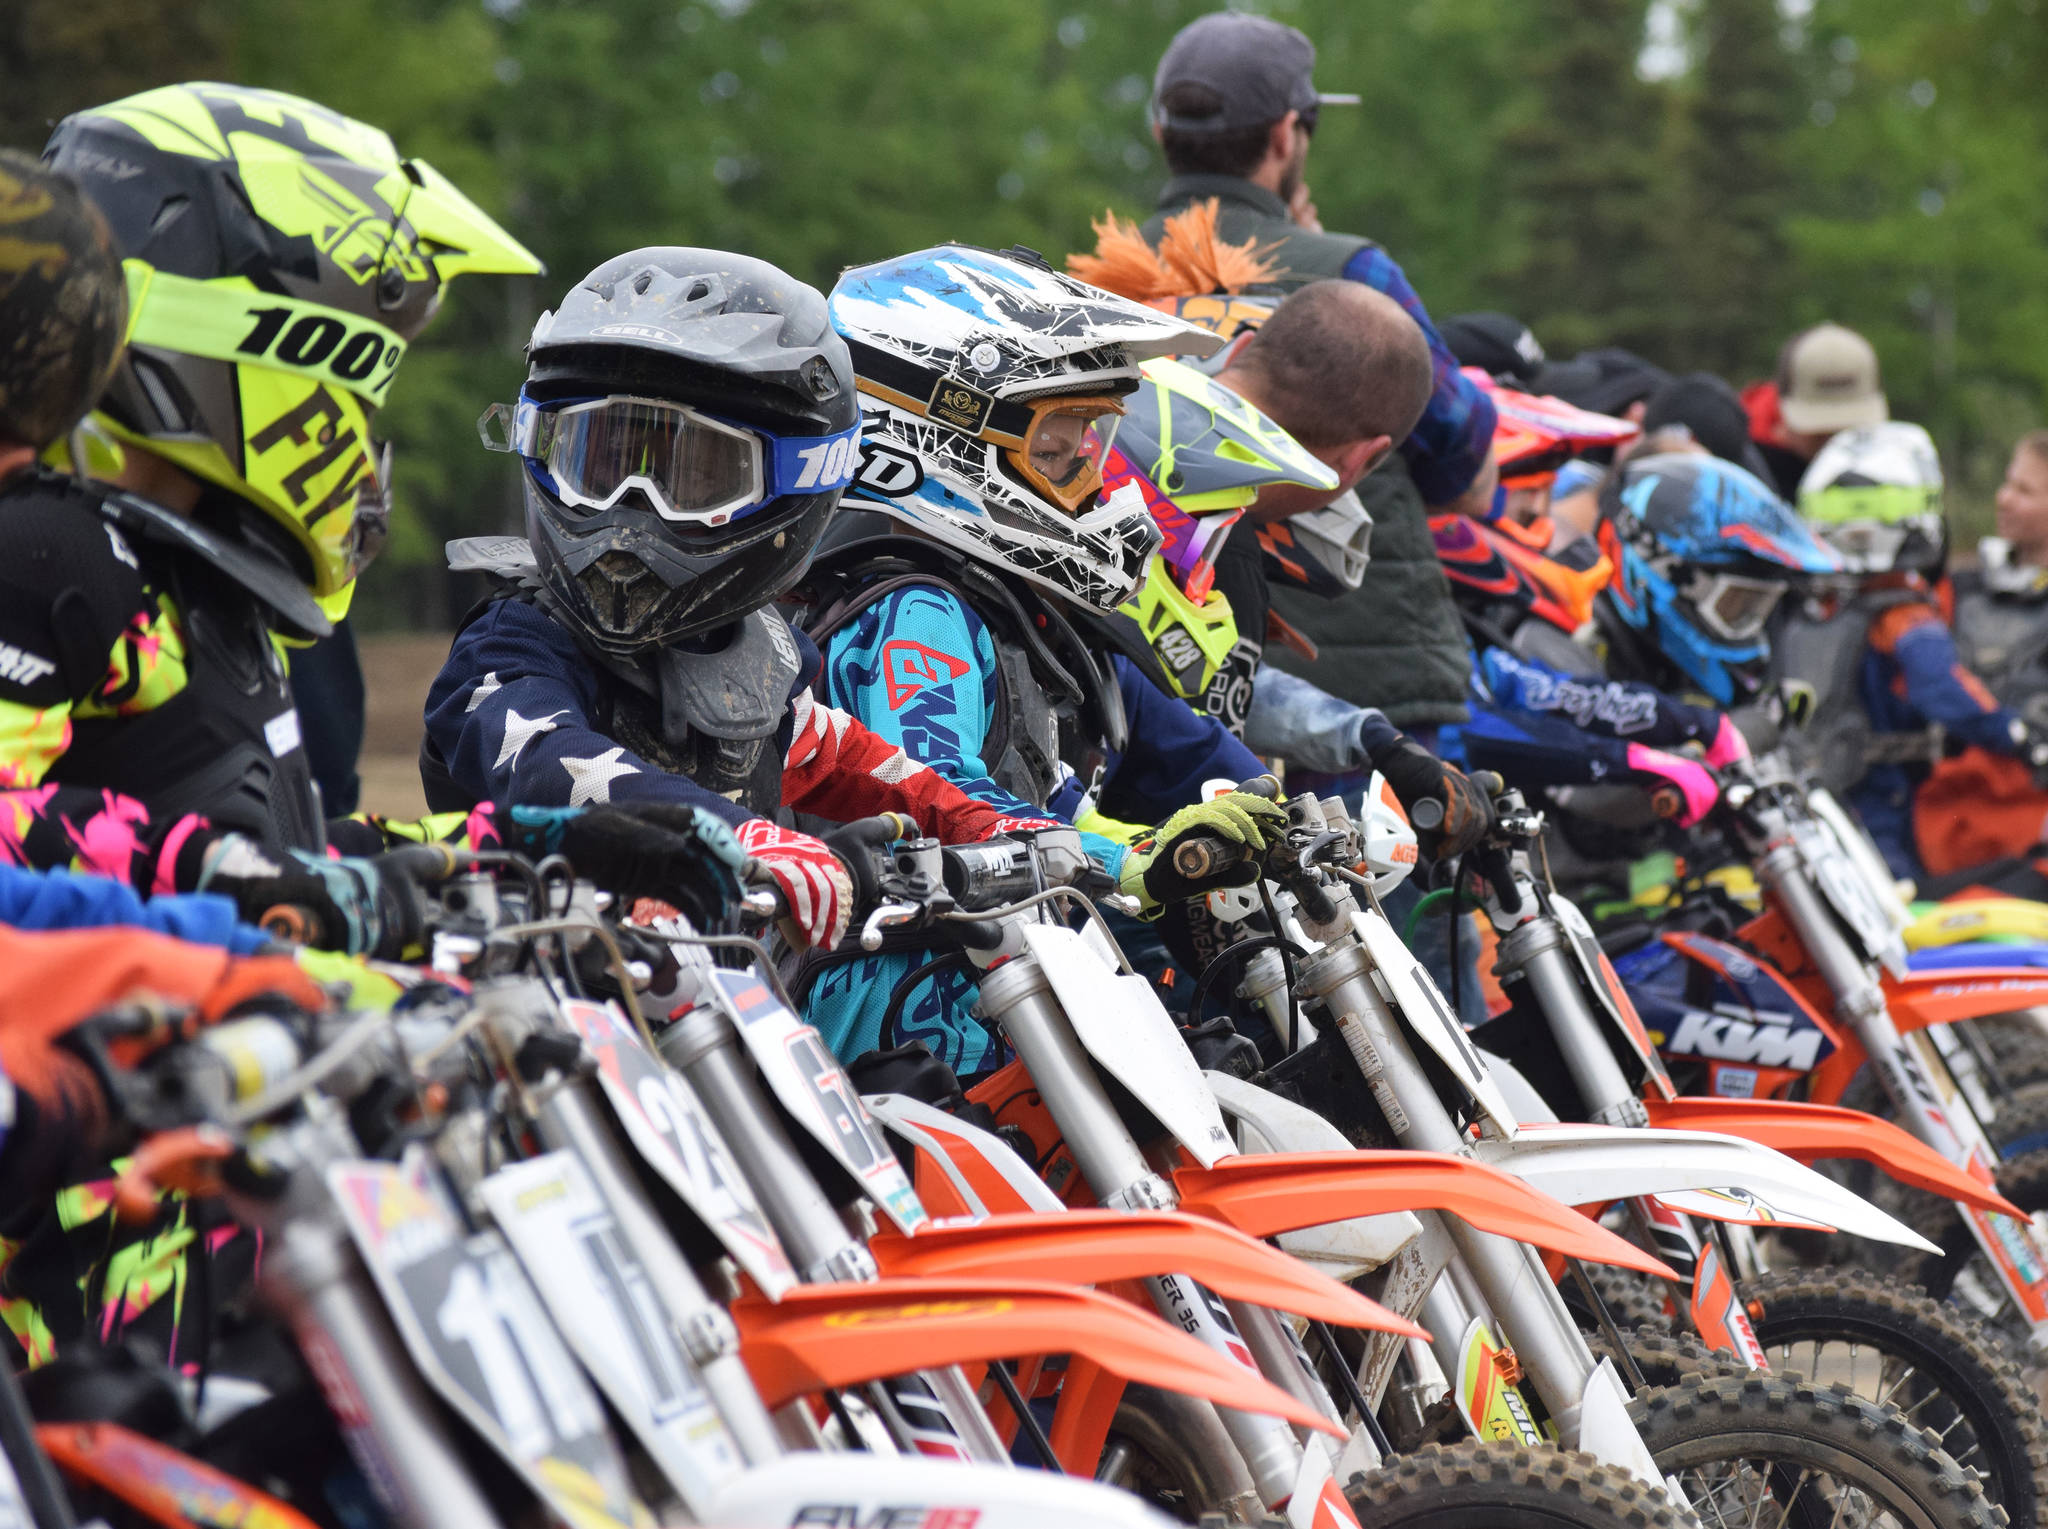 Young riders in the 65cc class prepare to take off for the start Saturday, June 15, 2019, at the Alaska State Motocross Championships at Twin City Raceway’s motocross track in Kenai, Alaska. (Photo by Joey Klecka/Peninsula Clarion)